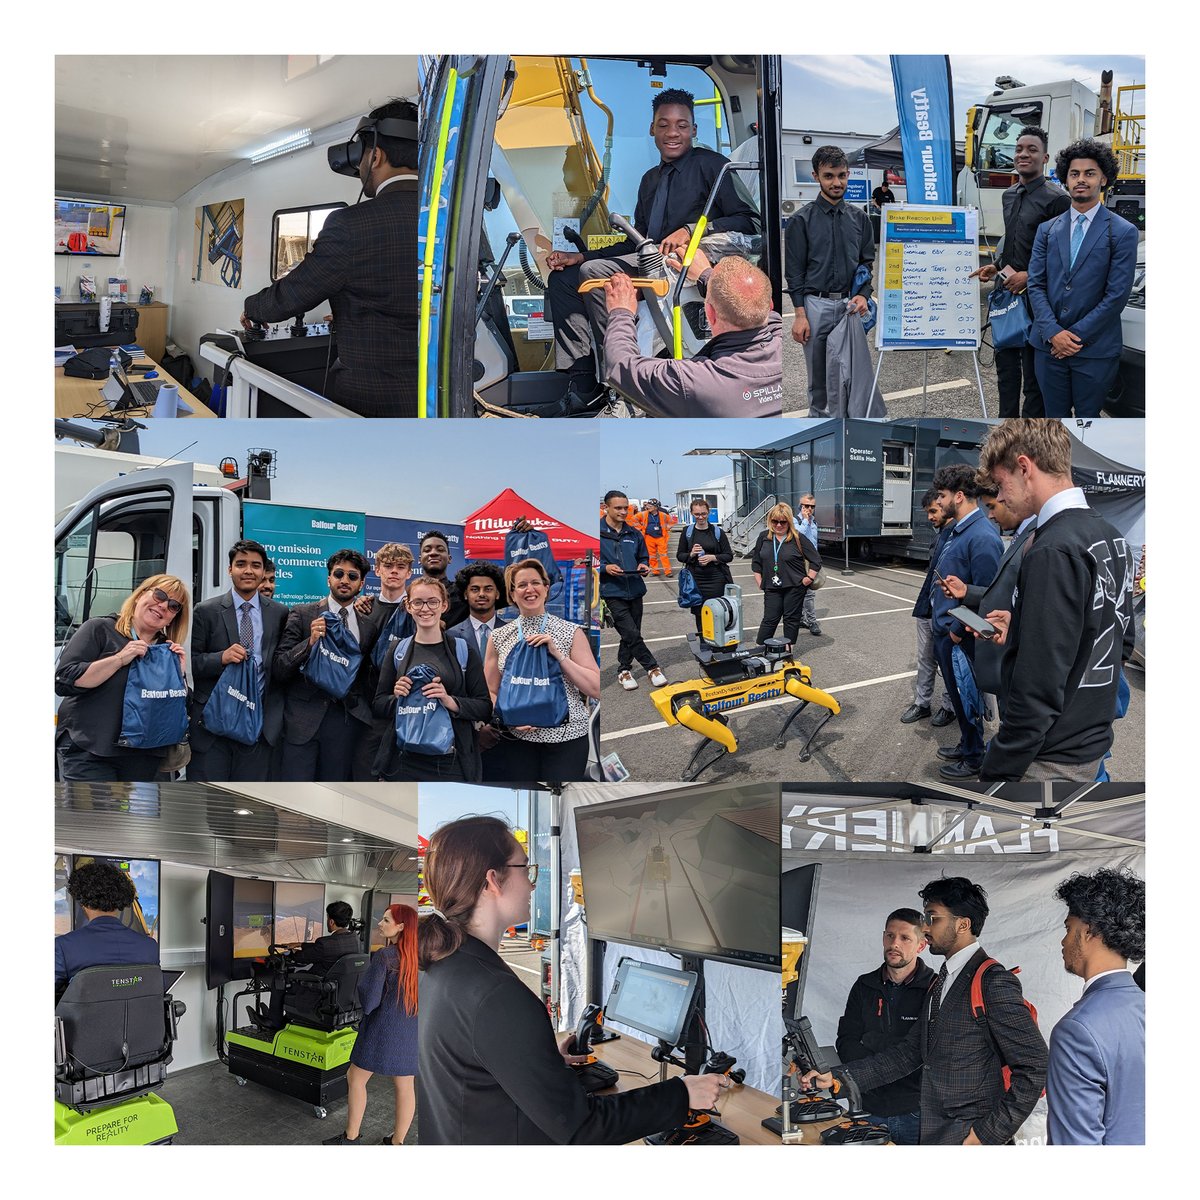 Eight Year 12 students visited Balfour Beatty VINCI Digital Technology in Construction Fair, and they got hands-on with the latest industry innovations. #WMGAcademy #WMGAcademySolihull #BalfourBeattyVINCI #Construction #Digital #Robots #HS2 #Engineering